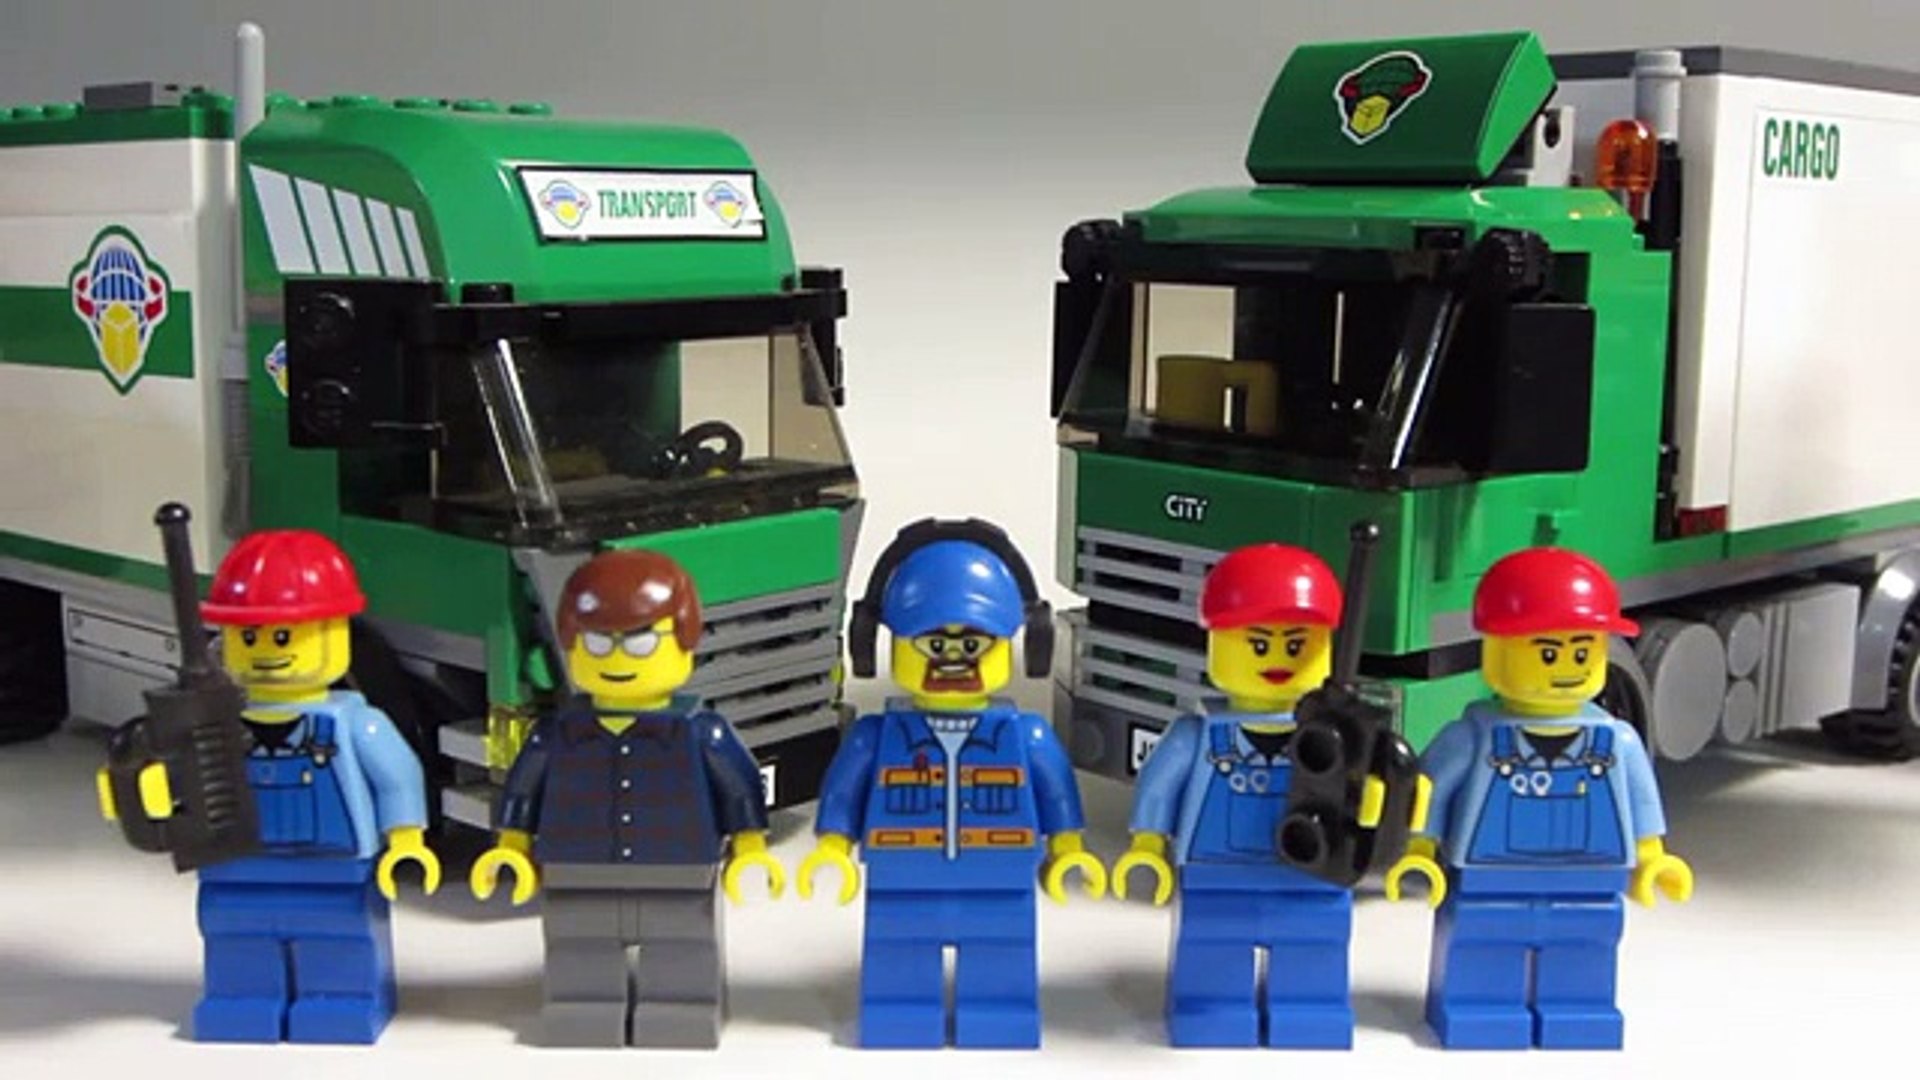 Lego City Cargo Truck Comparison Review - Dailymotion Video